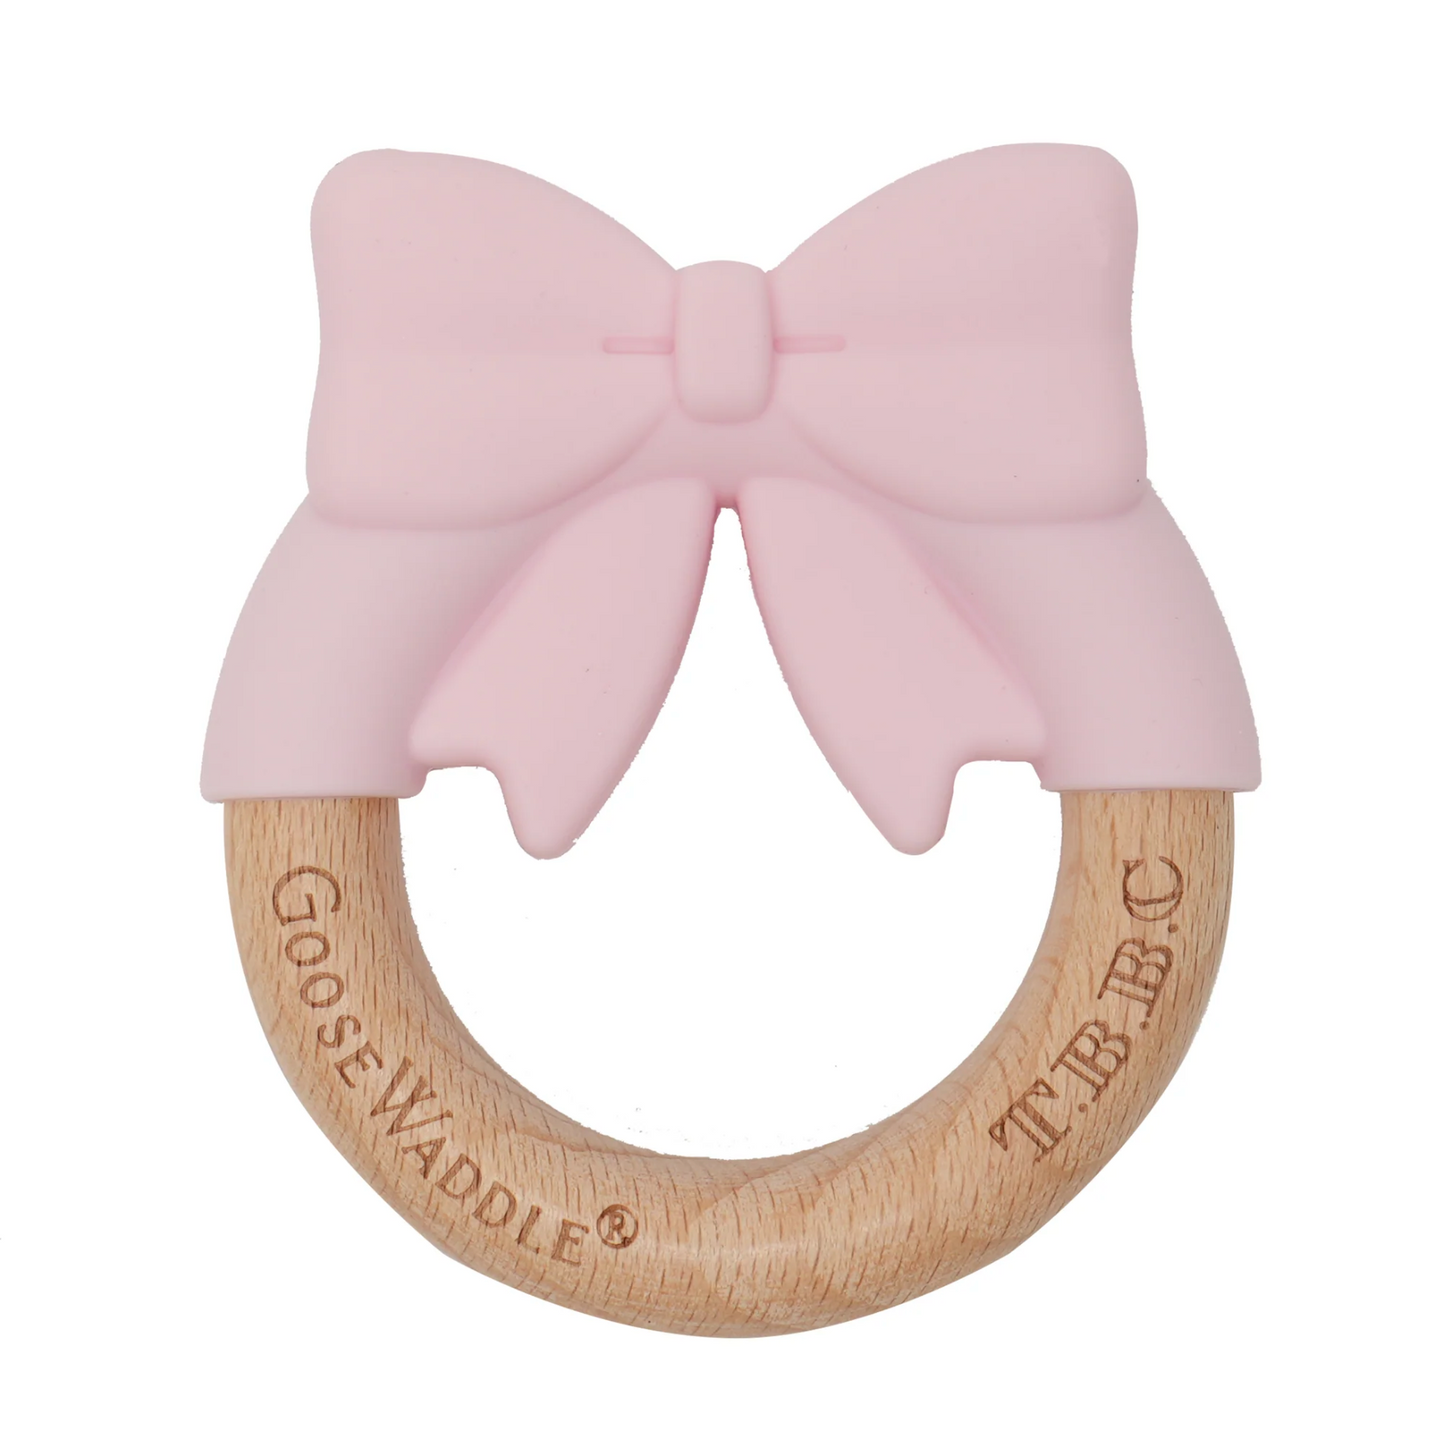 GOOSEWADDLE X T.B.B.C. BOW WOODEN & SILICONE TEETHER